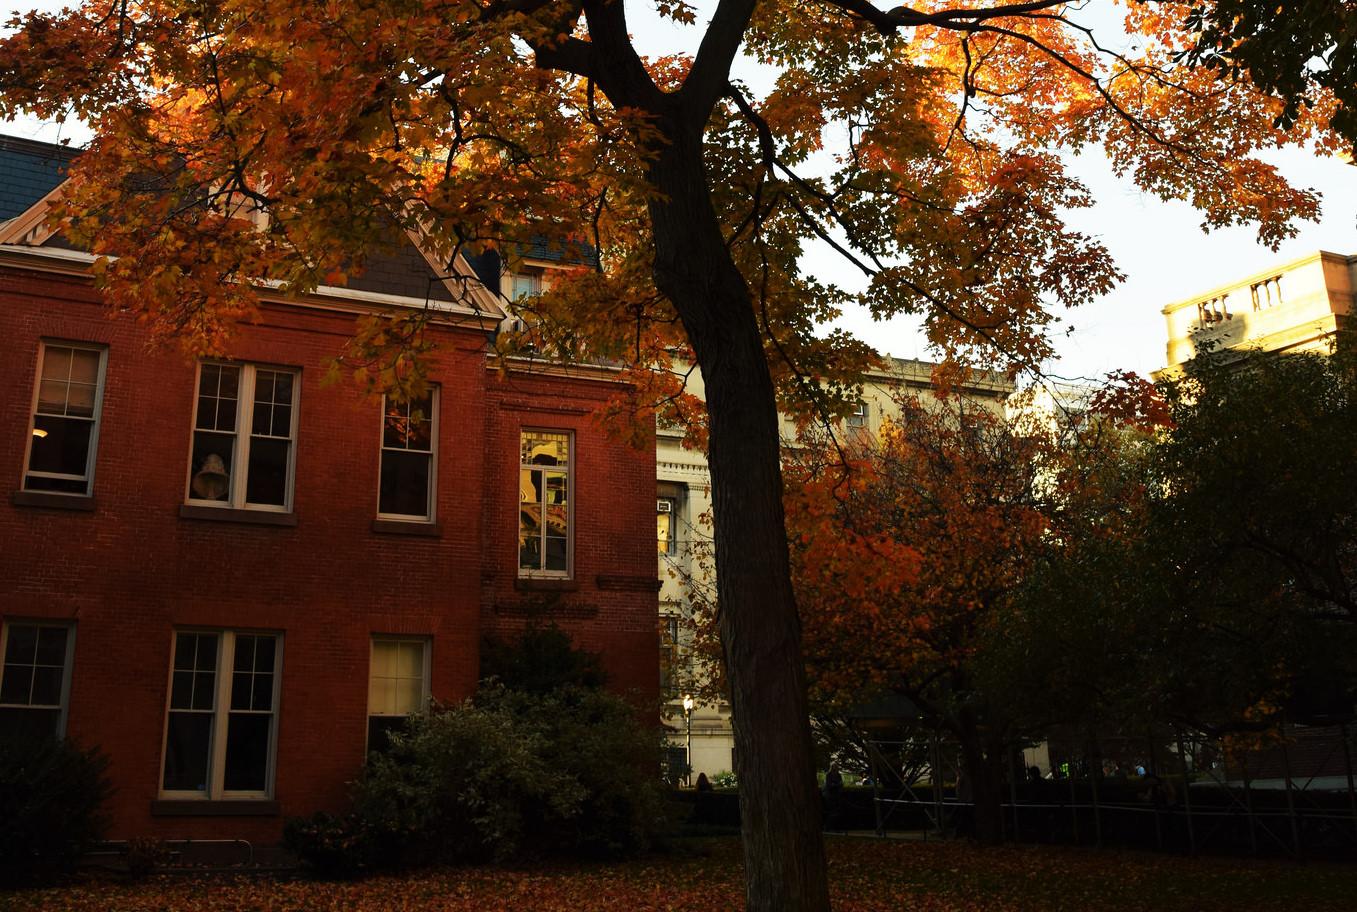 Maison francaise with fall foliage at sunset